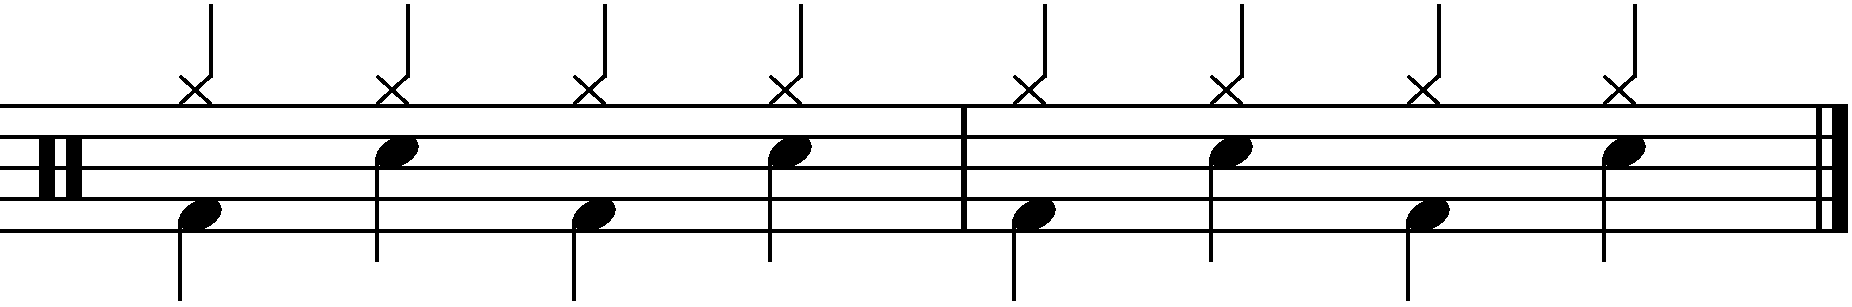 2 Bar Grooves - Example 1